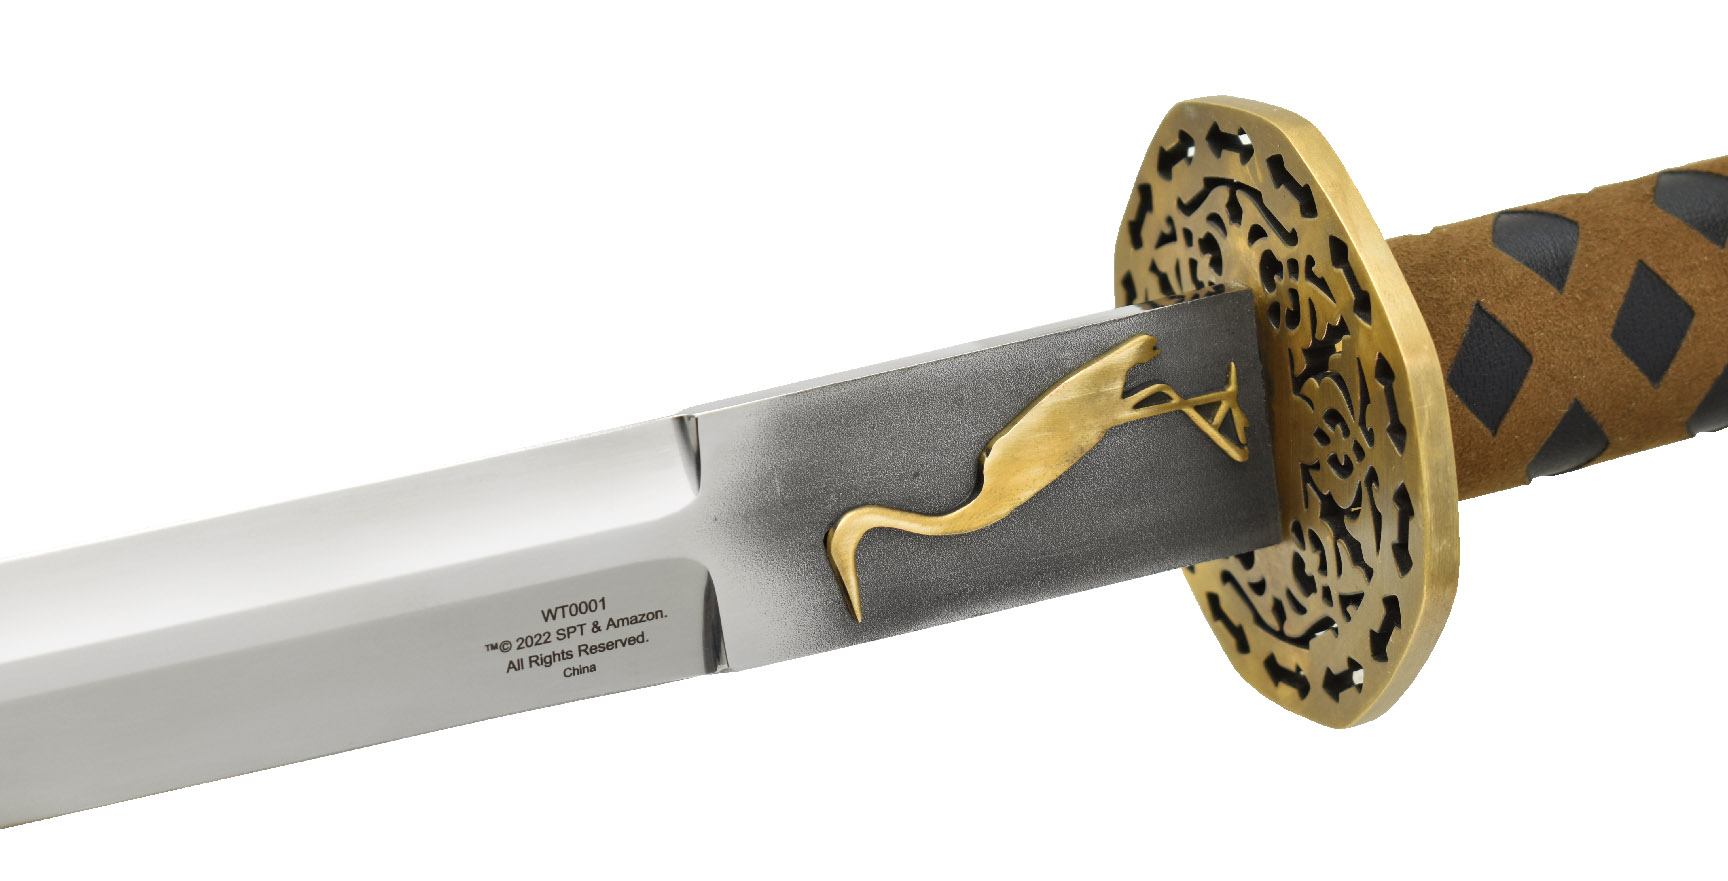 The Wheel of Time - Heron Mark Sword of Rand Al'Thorv – Officially Licensed Replica